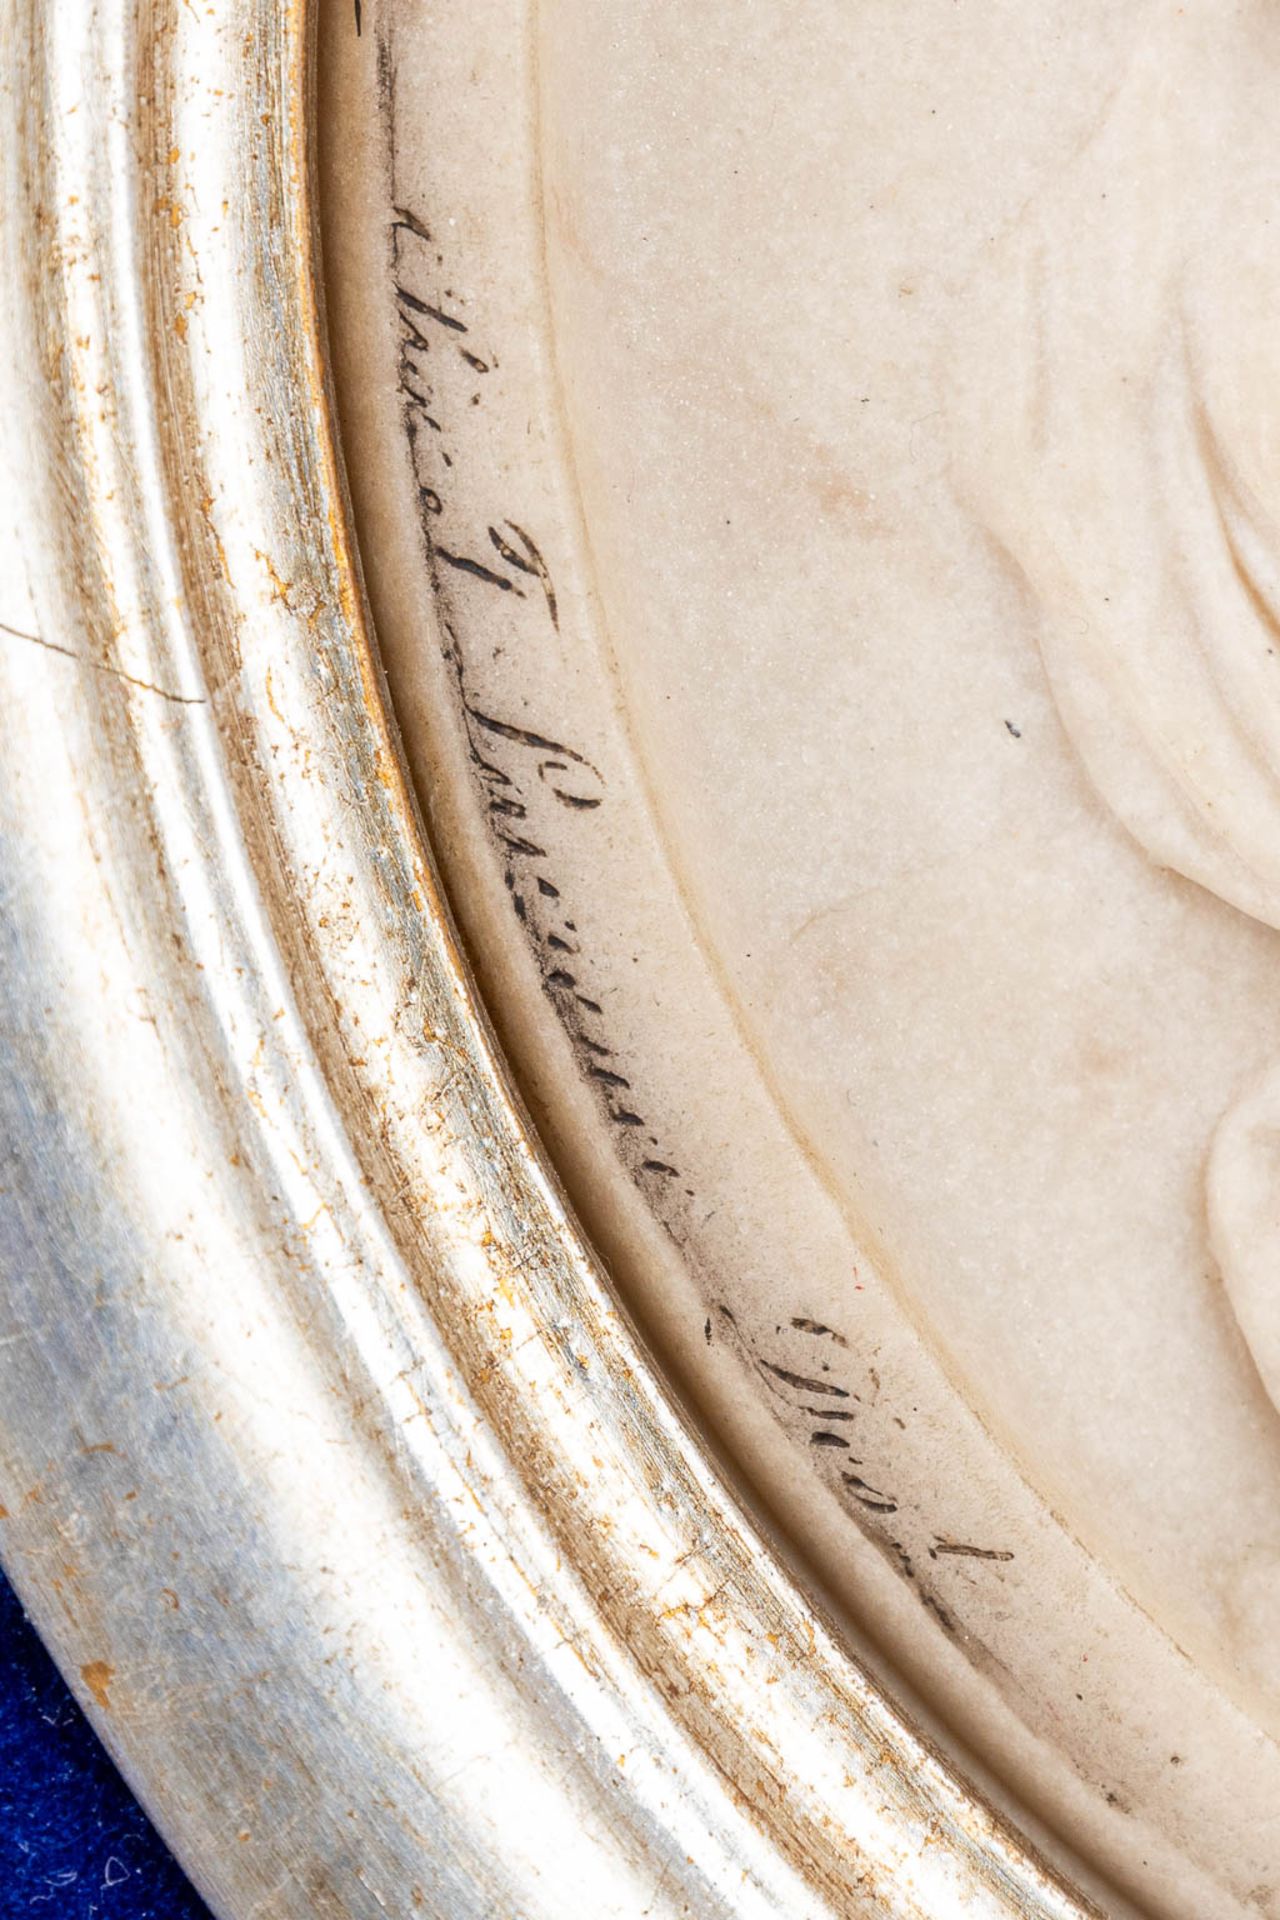 Edward William WYON (1811-1885)(attr.) A plaque made of sculptured marble with a bronze coin. - Image 4 of 8